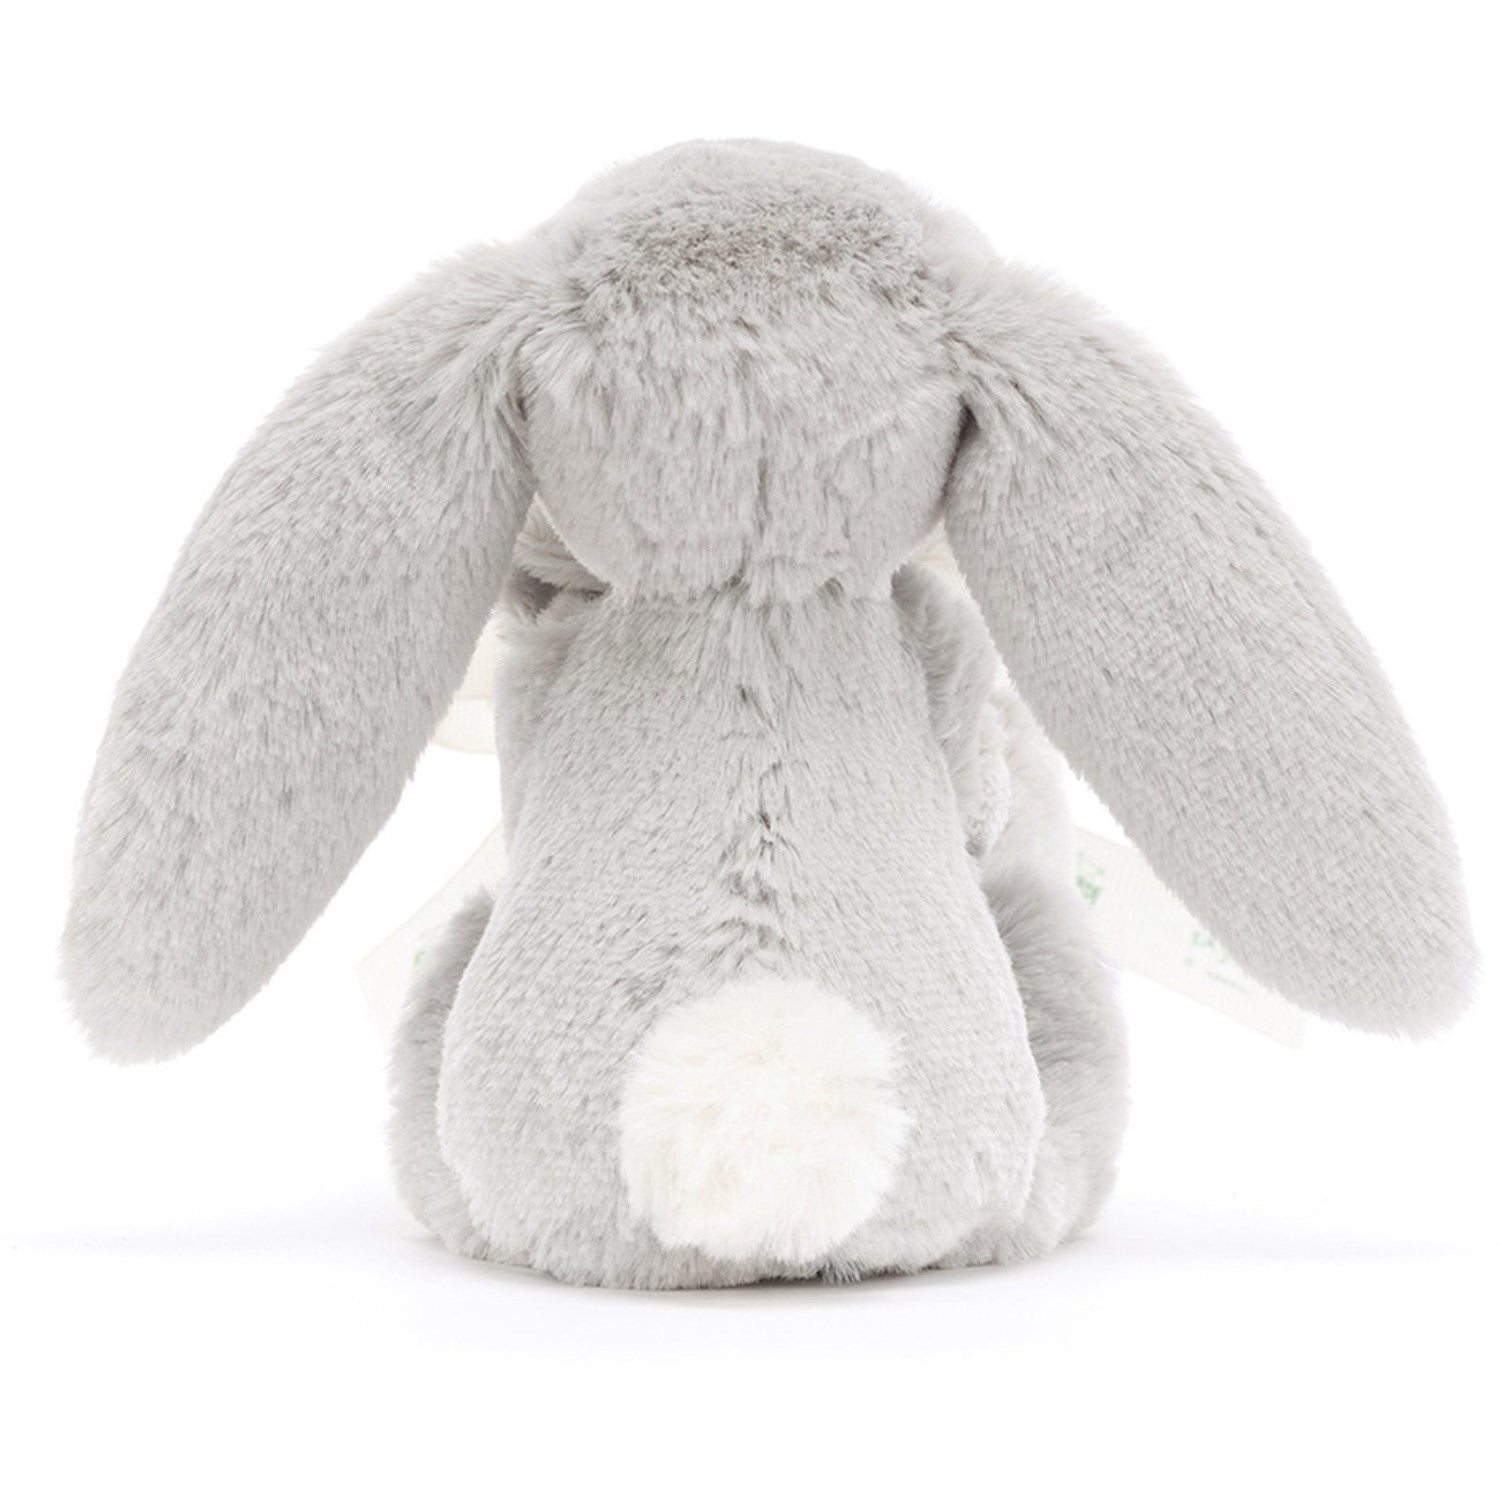 Jellycat Bashful Silver Bunny Soother 5